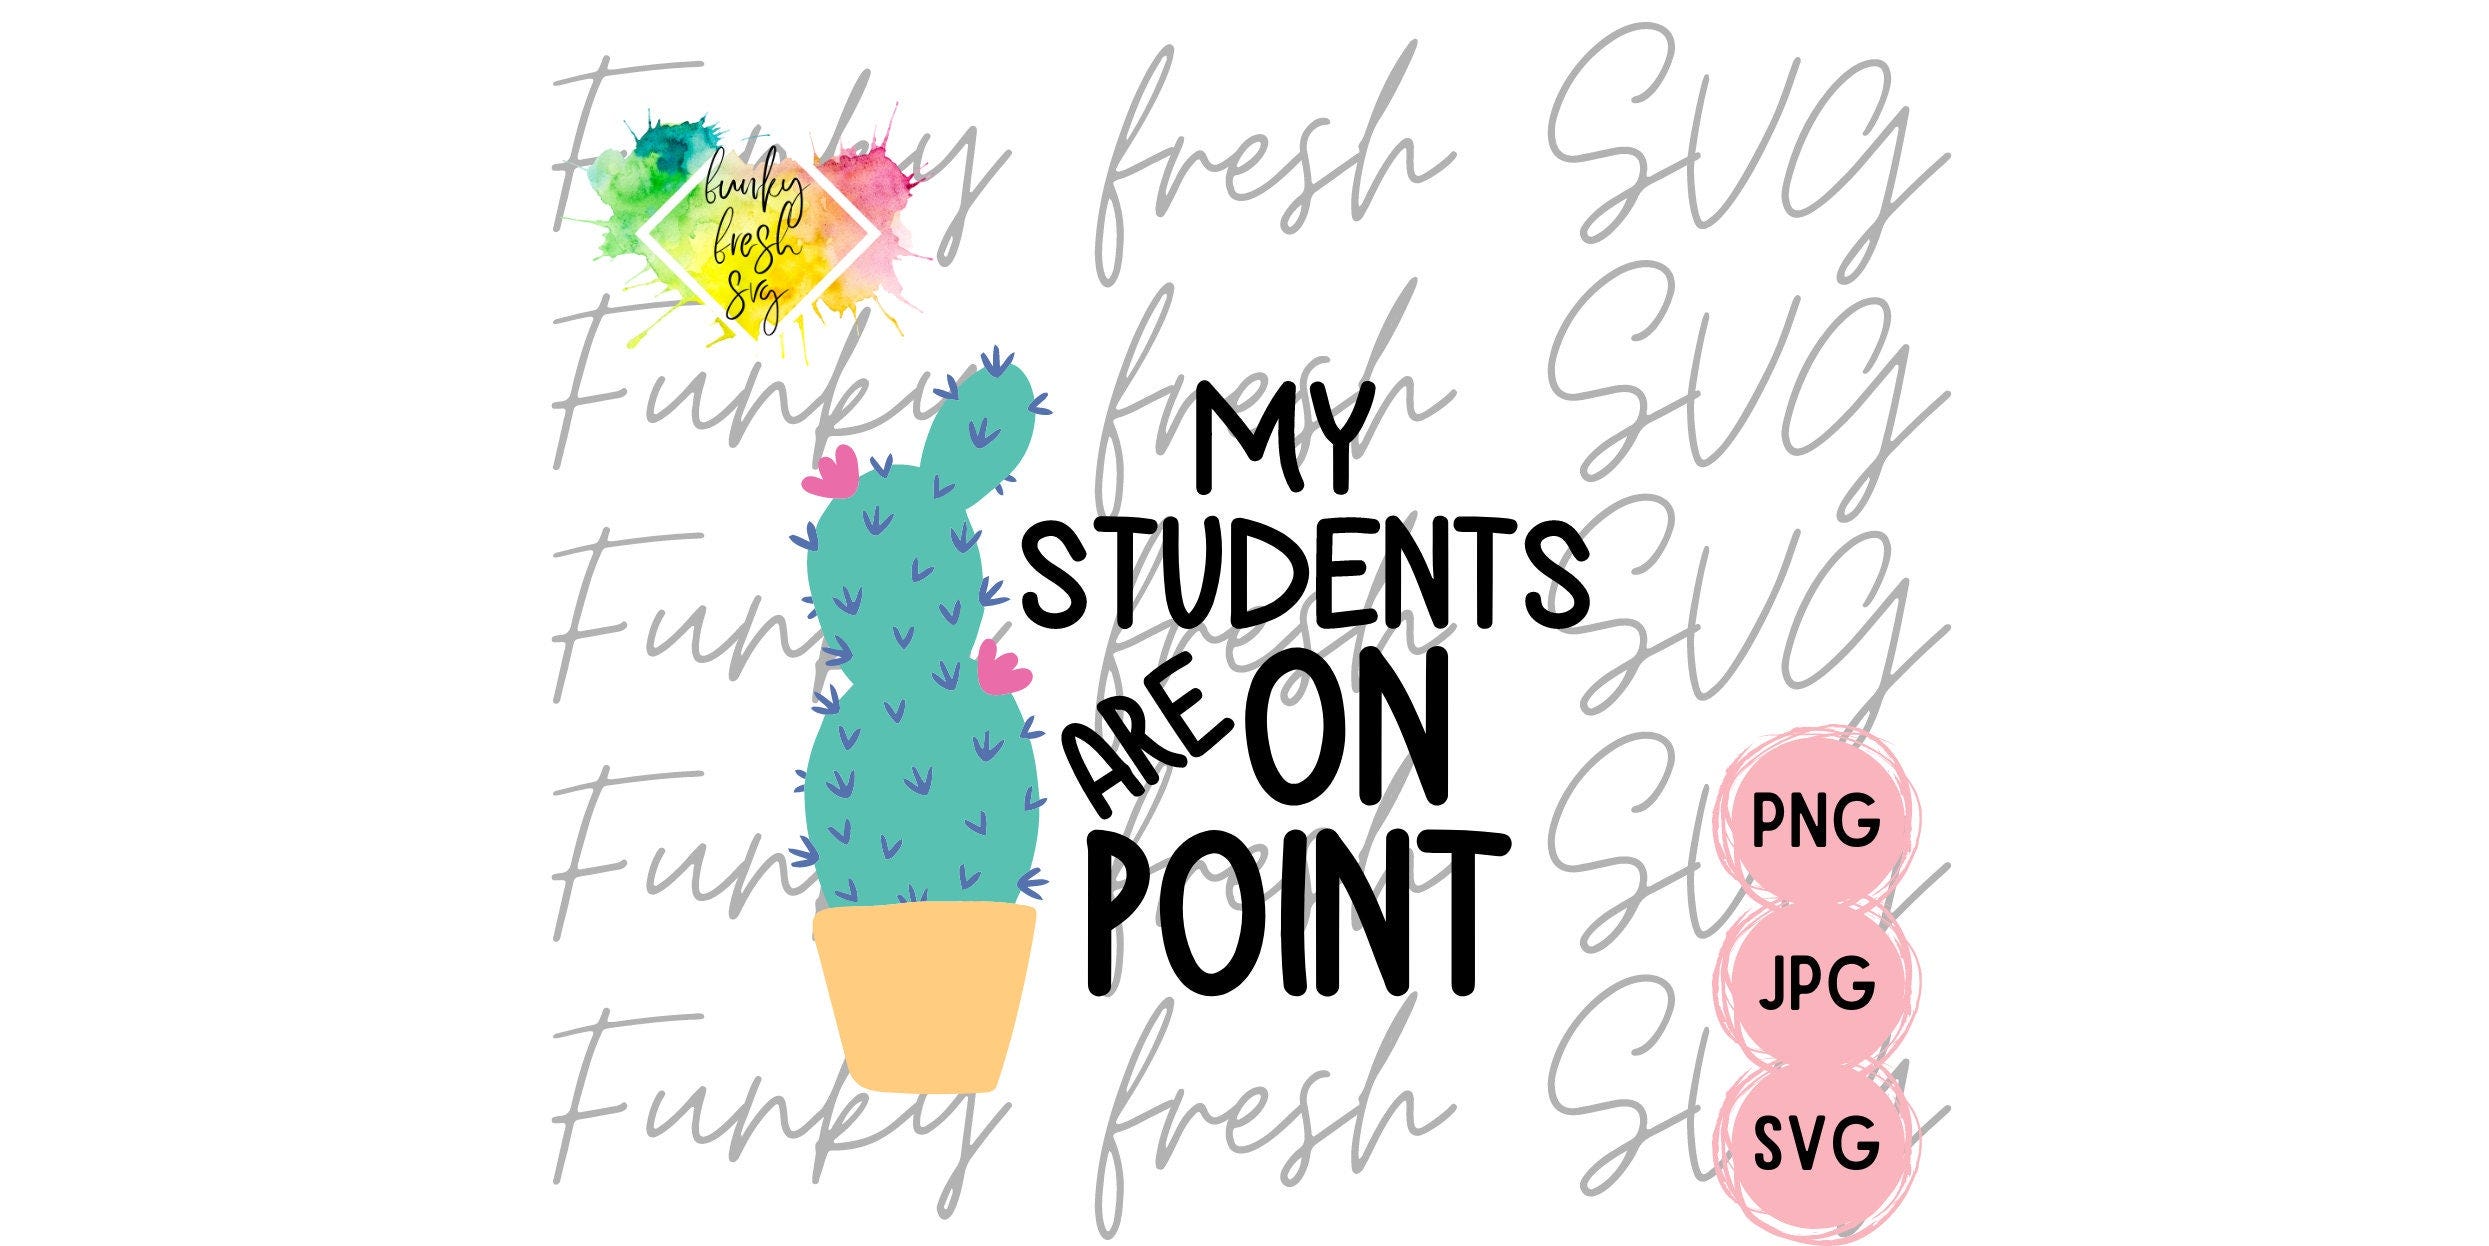 My Students Are On Point SVG/PNG/JPG | Free Commercial Use | Digital Cut File For Cricut/Silhouette